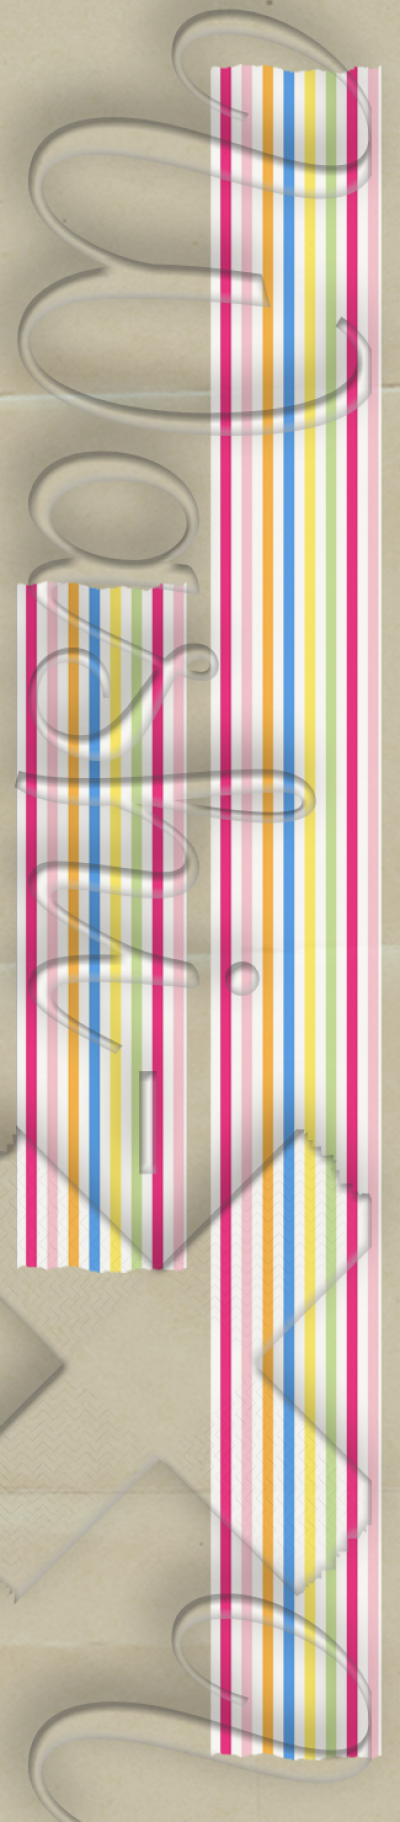 Lines patterned washi tape style 2